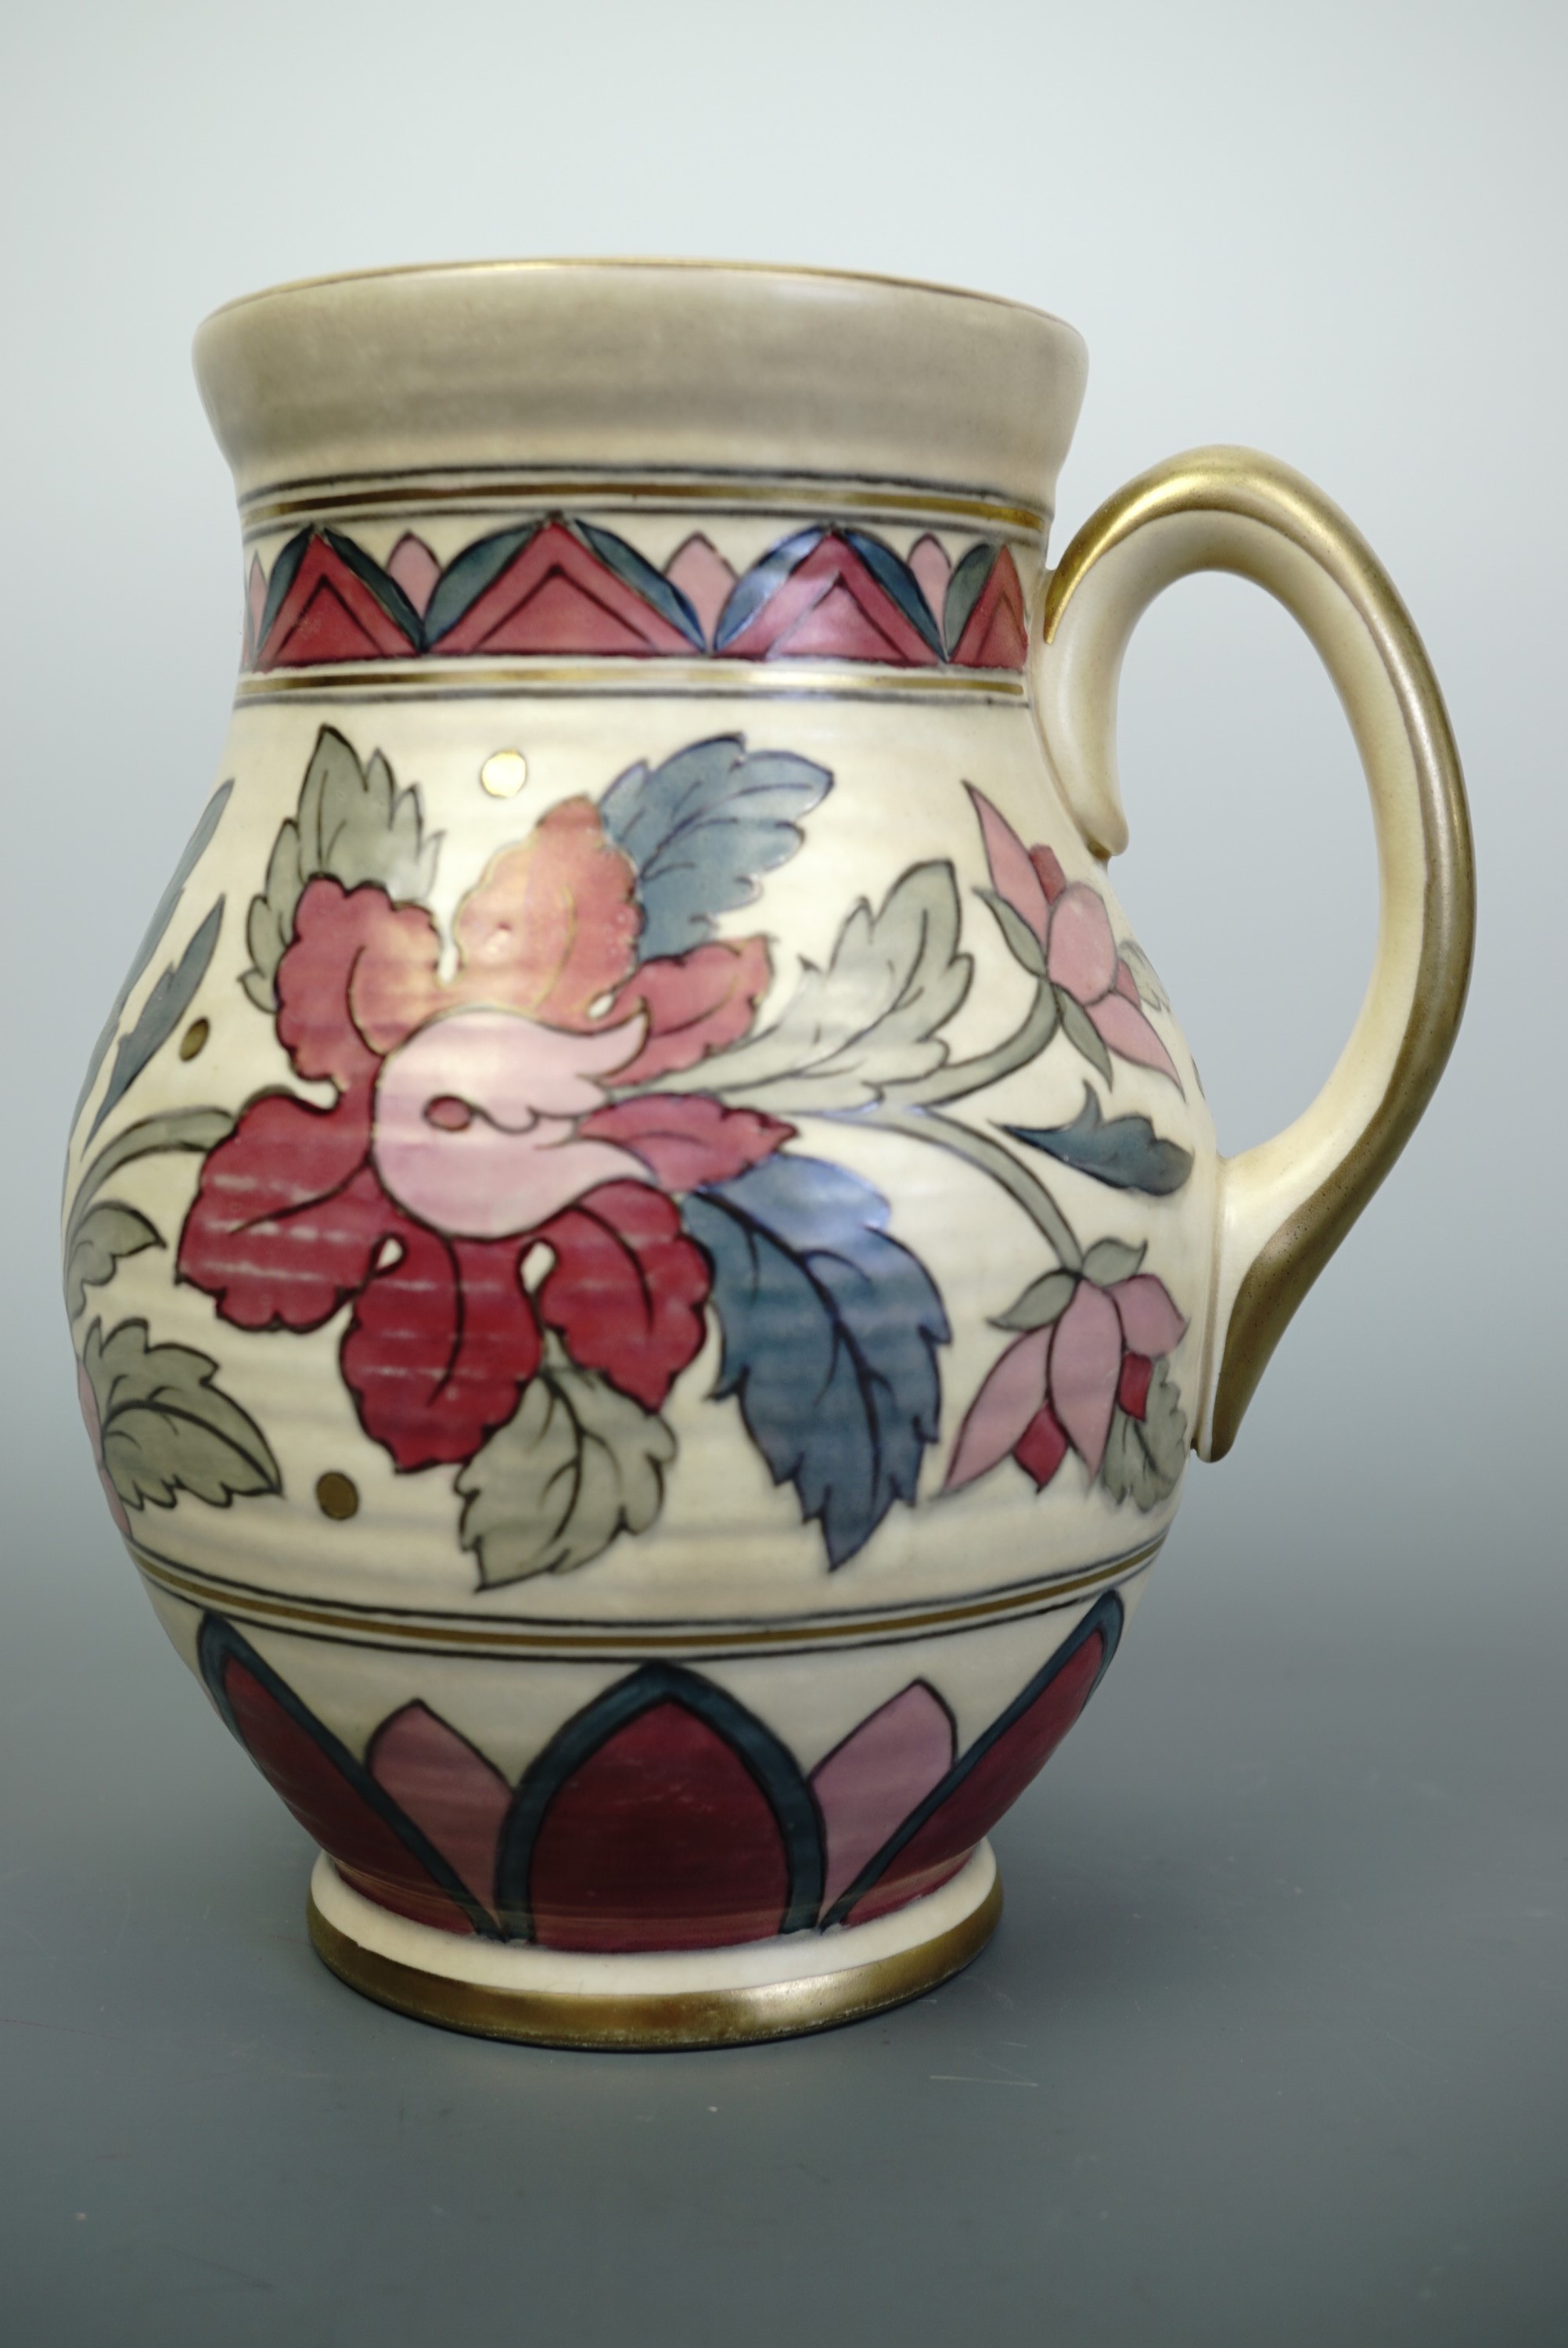 A Charlotte Rhead for Crown Ducal Ankara pattern flower jug, decorated in tones of pink, rose, green